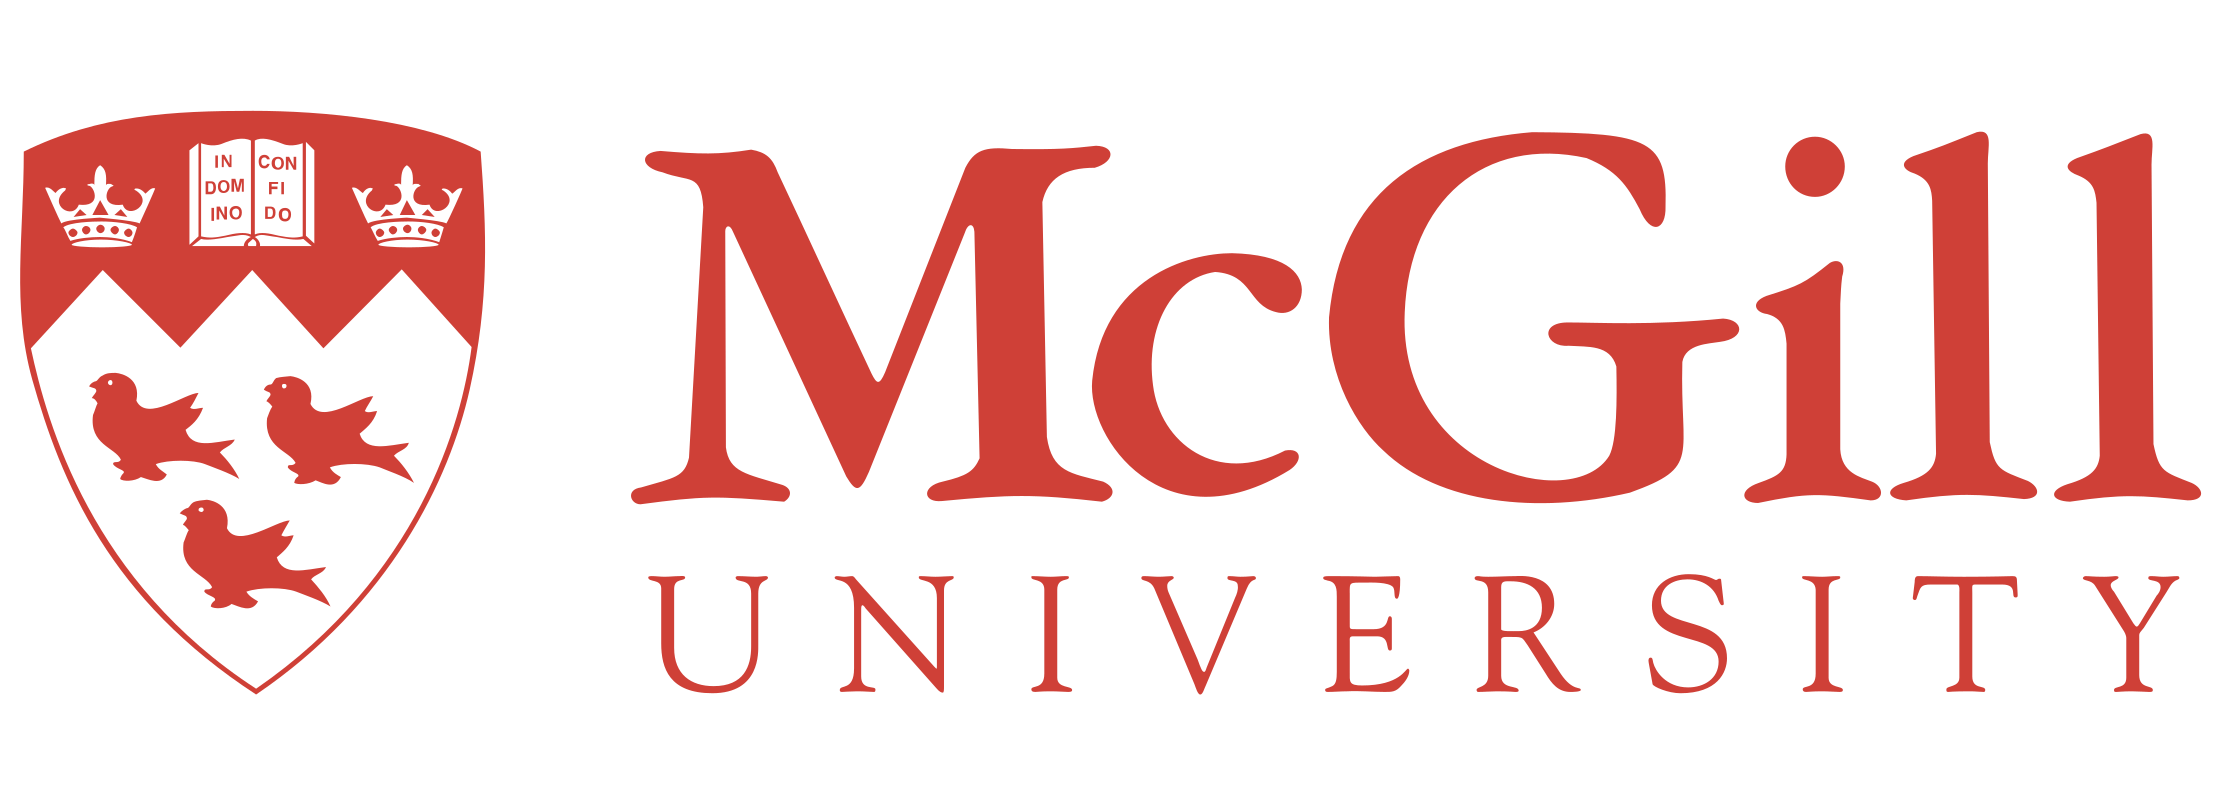 Nutrition - Health and Disease | Bachelor's degree | Health & Well-Being | On Campus | McGill University | Canada